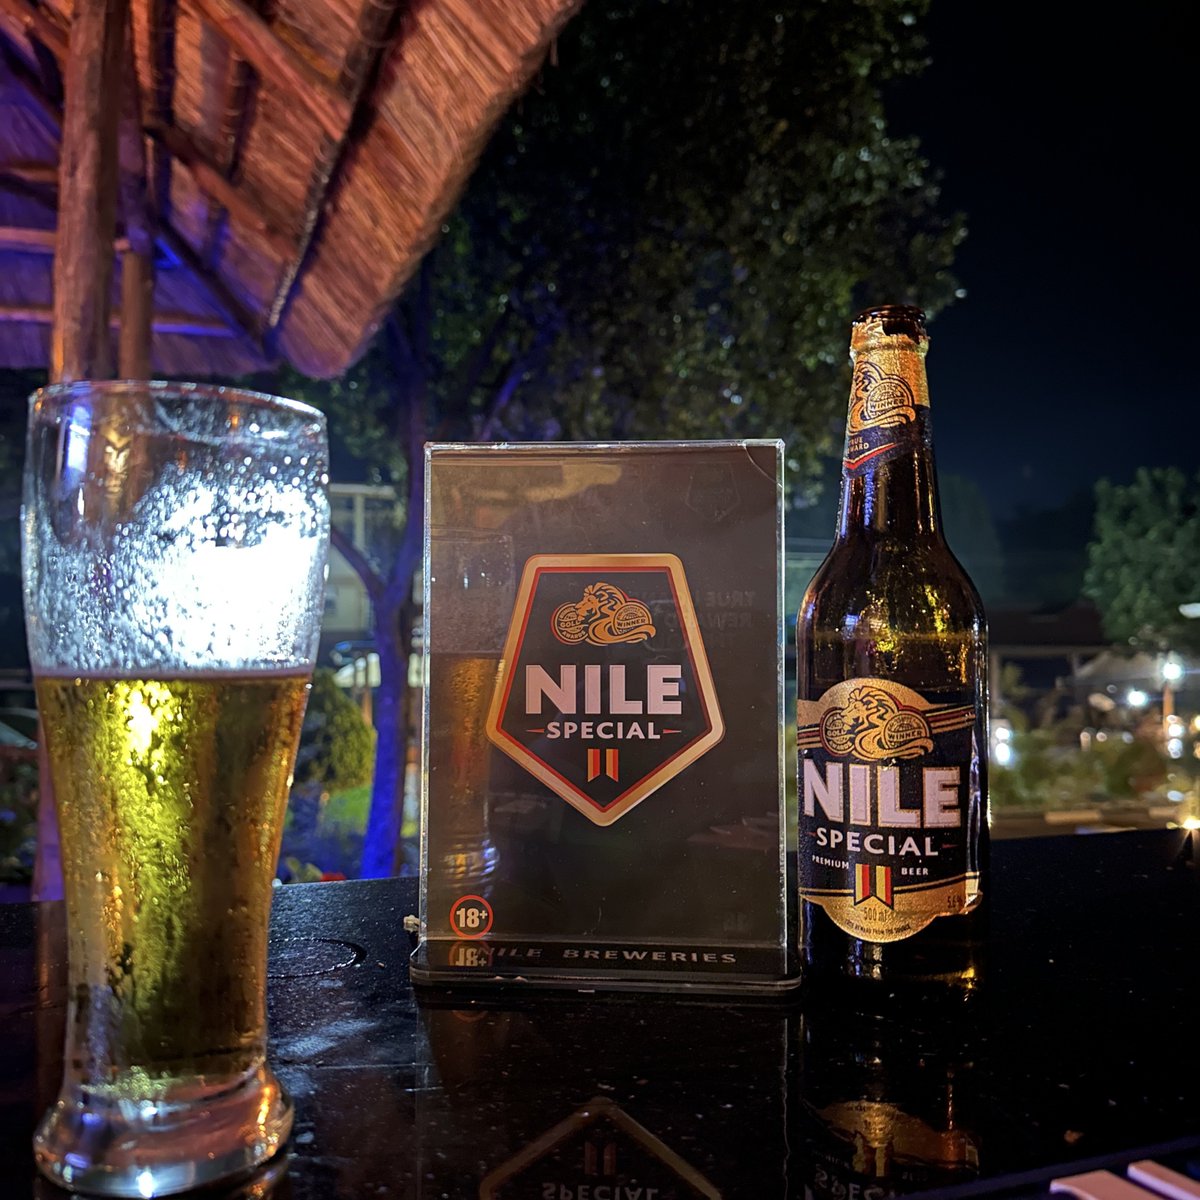 Sip, savor and cherish the moment with @NileSpecial 

#UnmatchedInGold